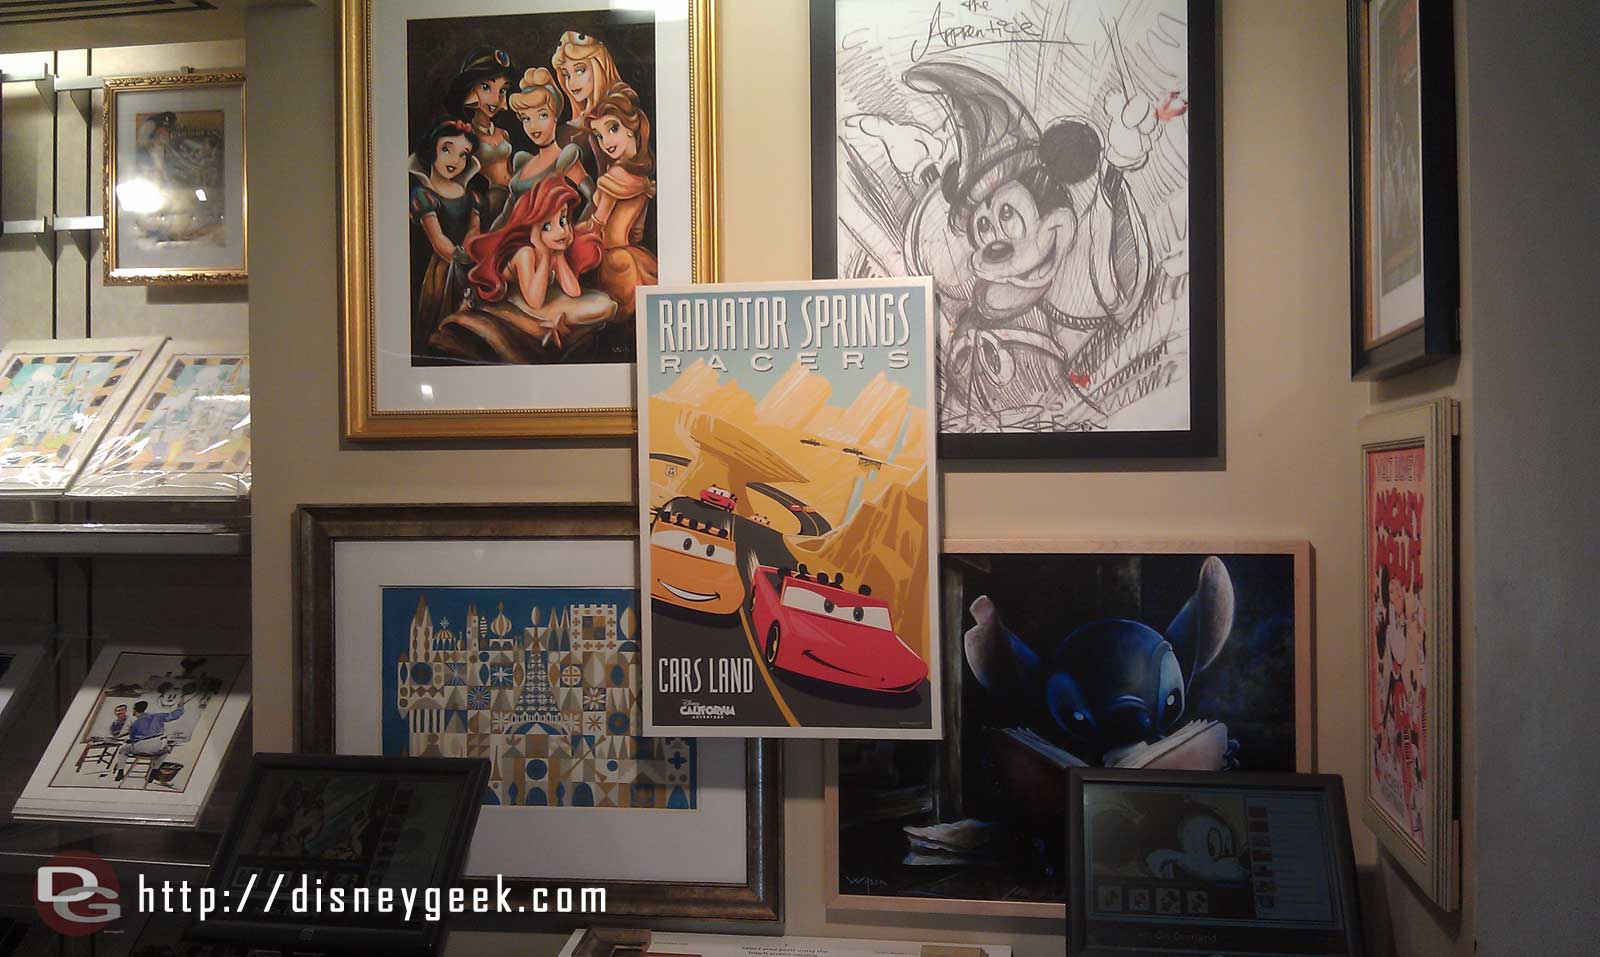 Radiator Springs Racers attraction poster front and center in the Animation Gallery